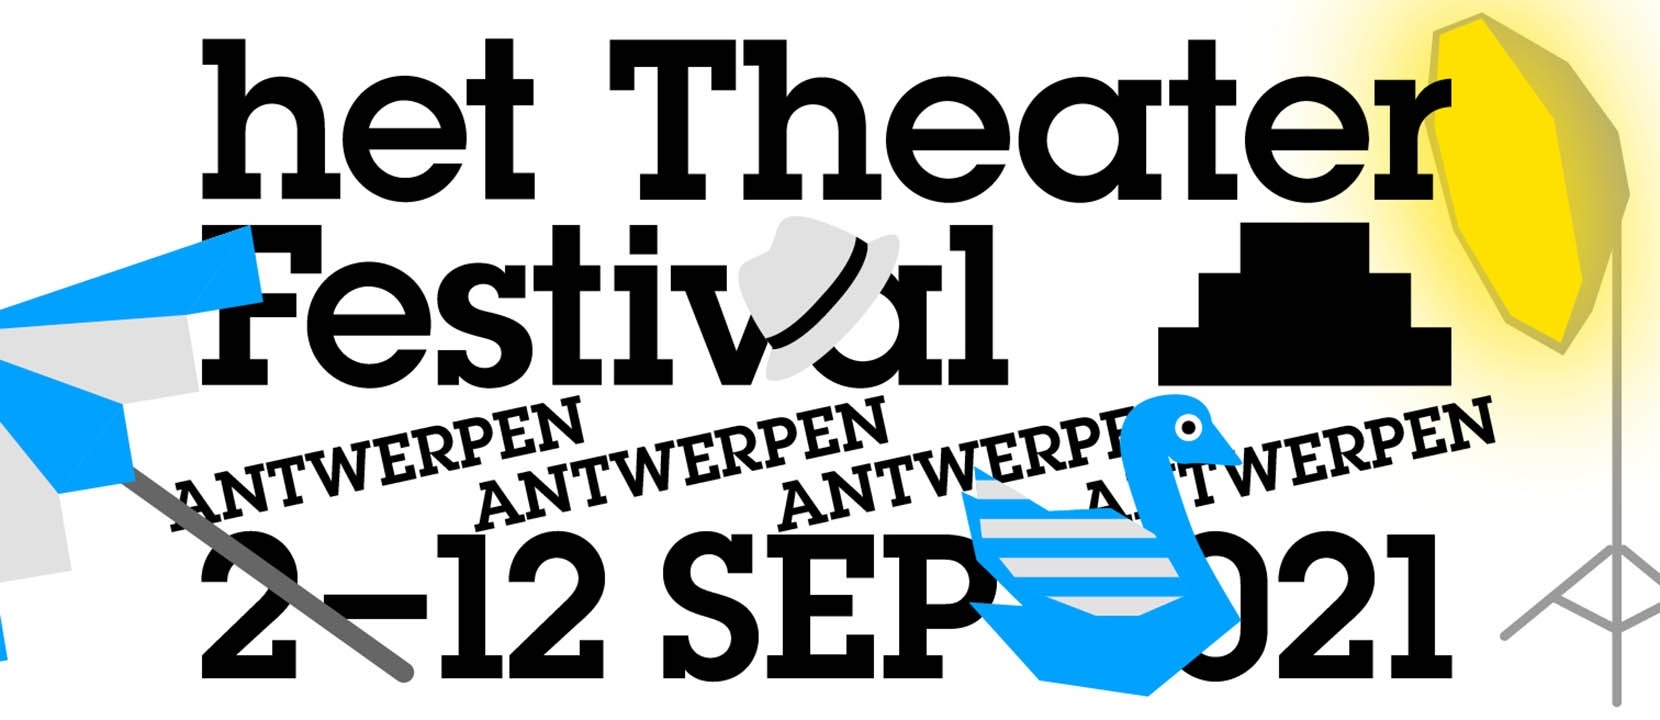 TWO TONEELHUIS PERFORMANCES SELECTED FOR HET THEATERFESTIVAL 2021!